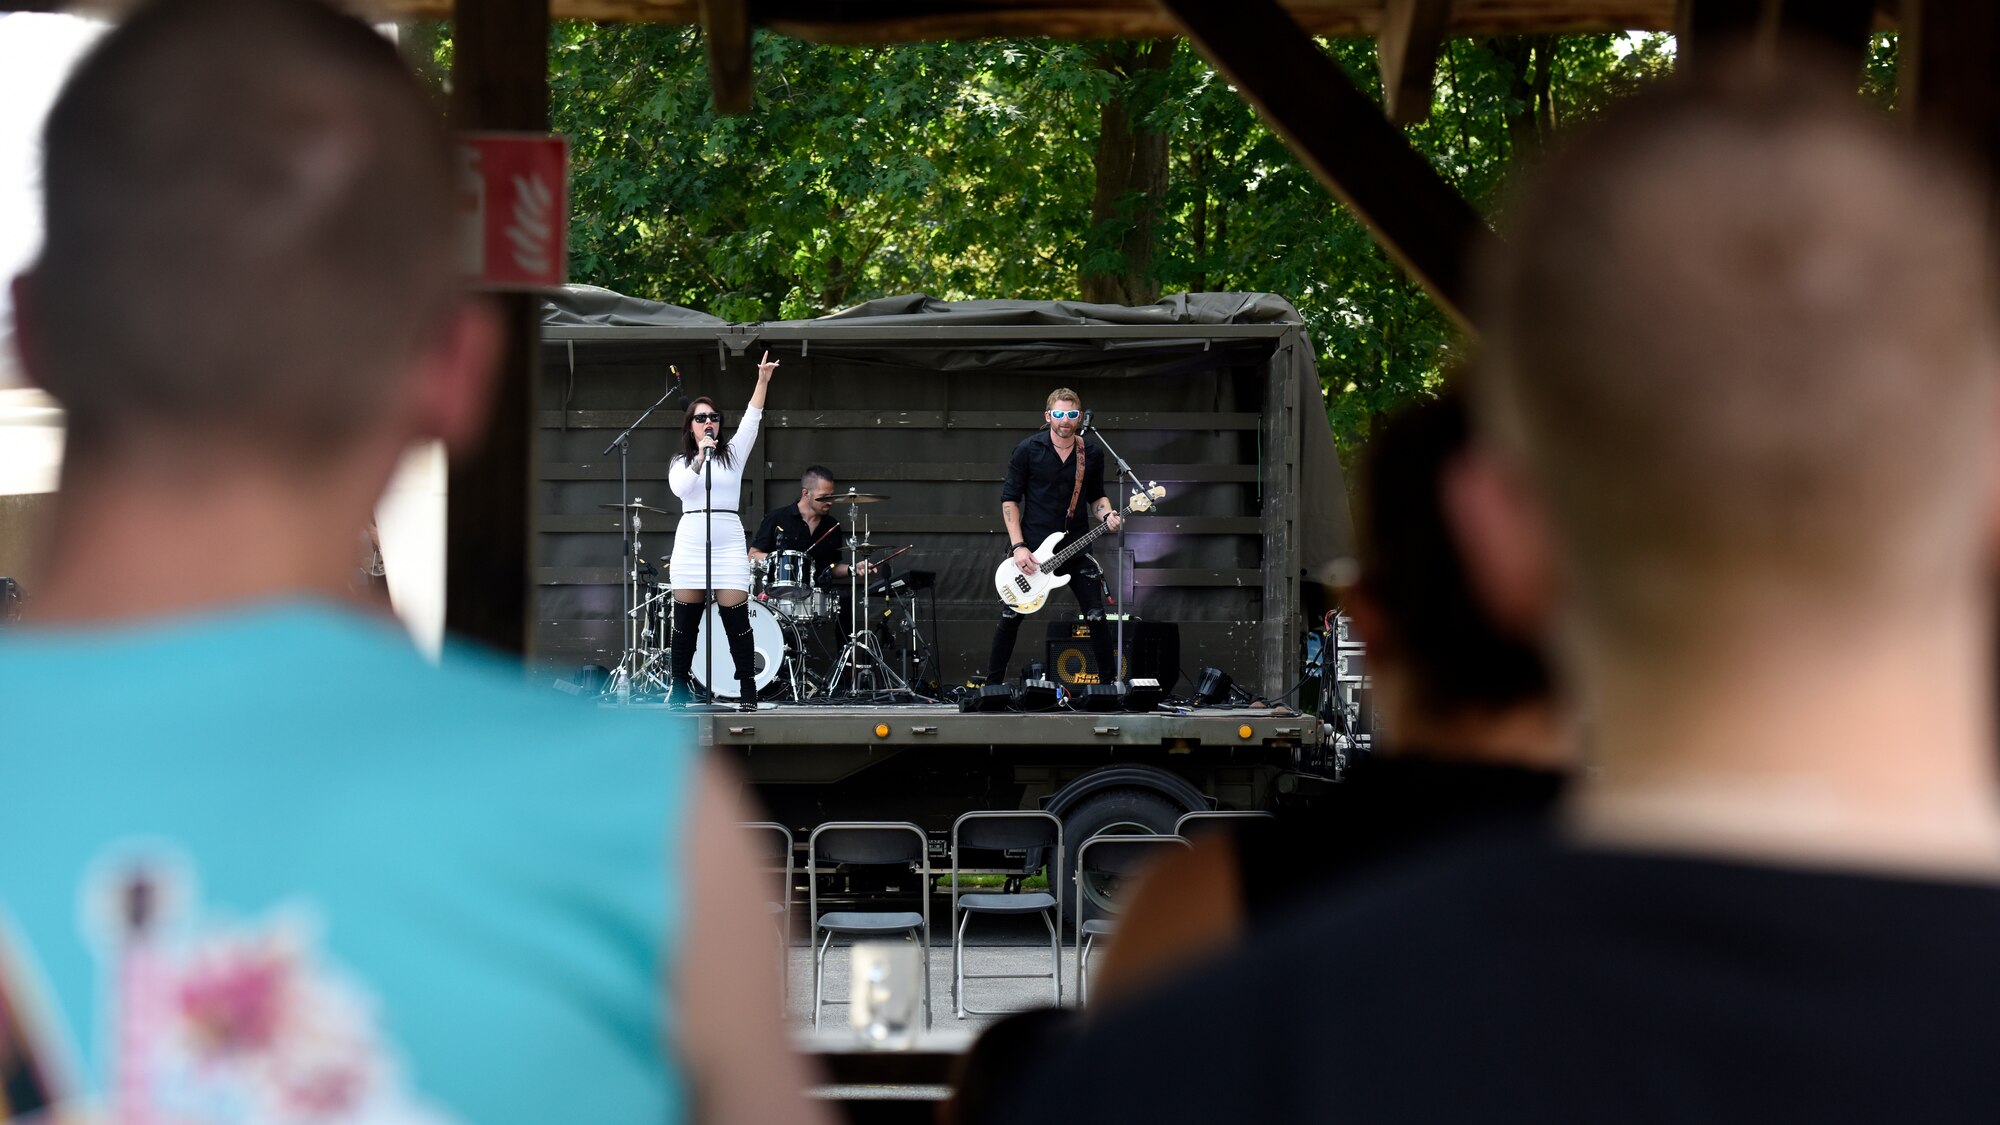 Professional band Sweet Siren plays a concert on Volkel Air Base, Netherlands, June 29, 2022. The free event was open to both US Airmen and partner members of the Royal Netherlands air force.